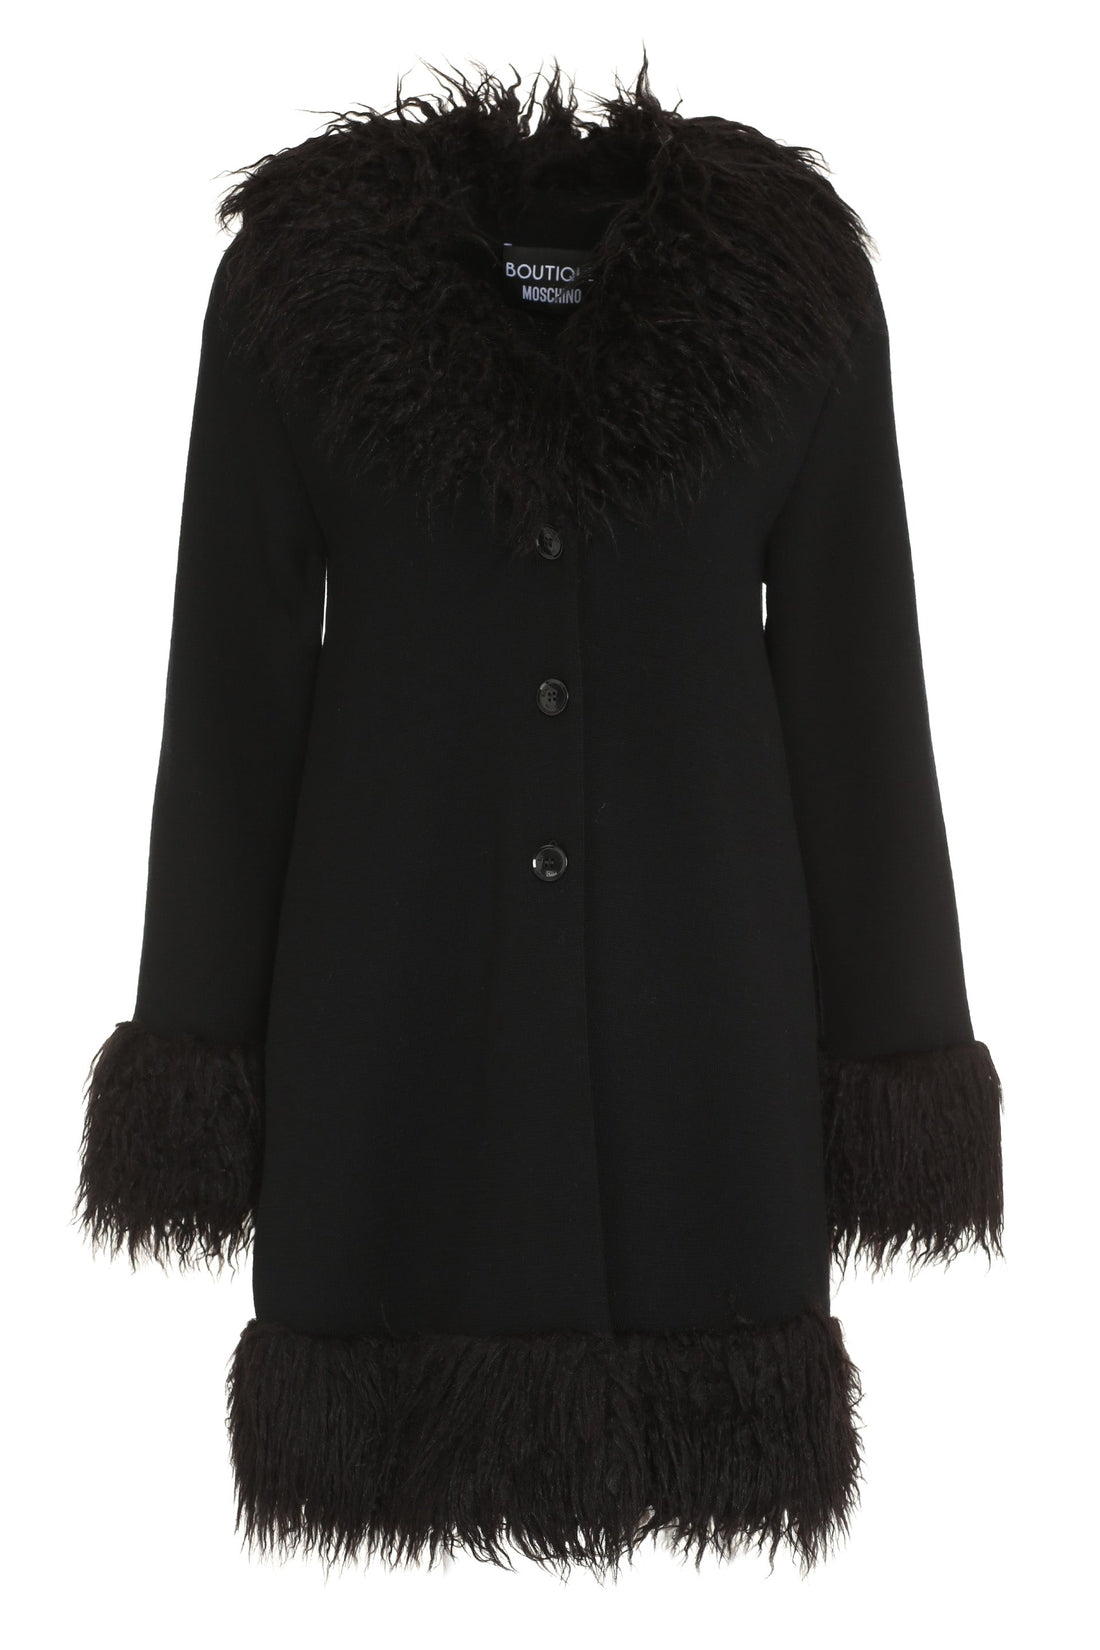 Boutique Moschino-OUTLET-SALE-Wool jersey coat-ARCHIVIST